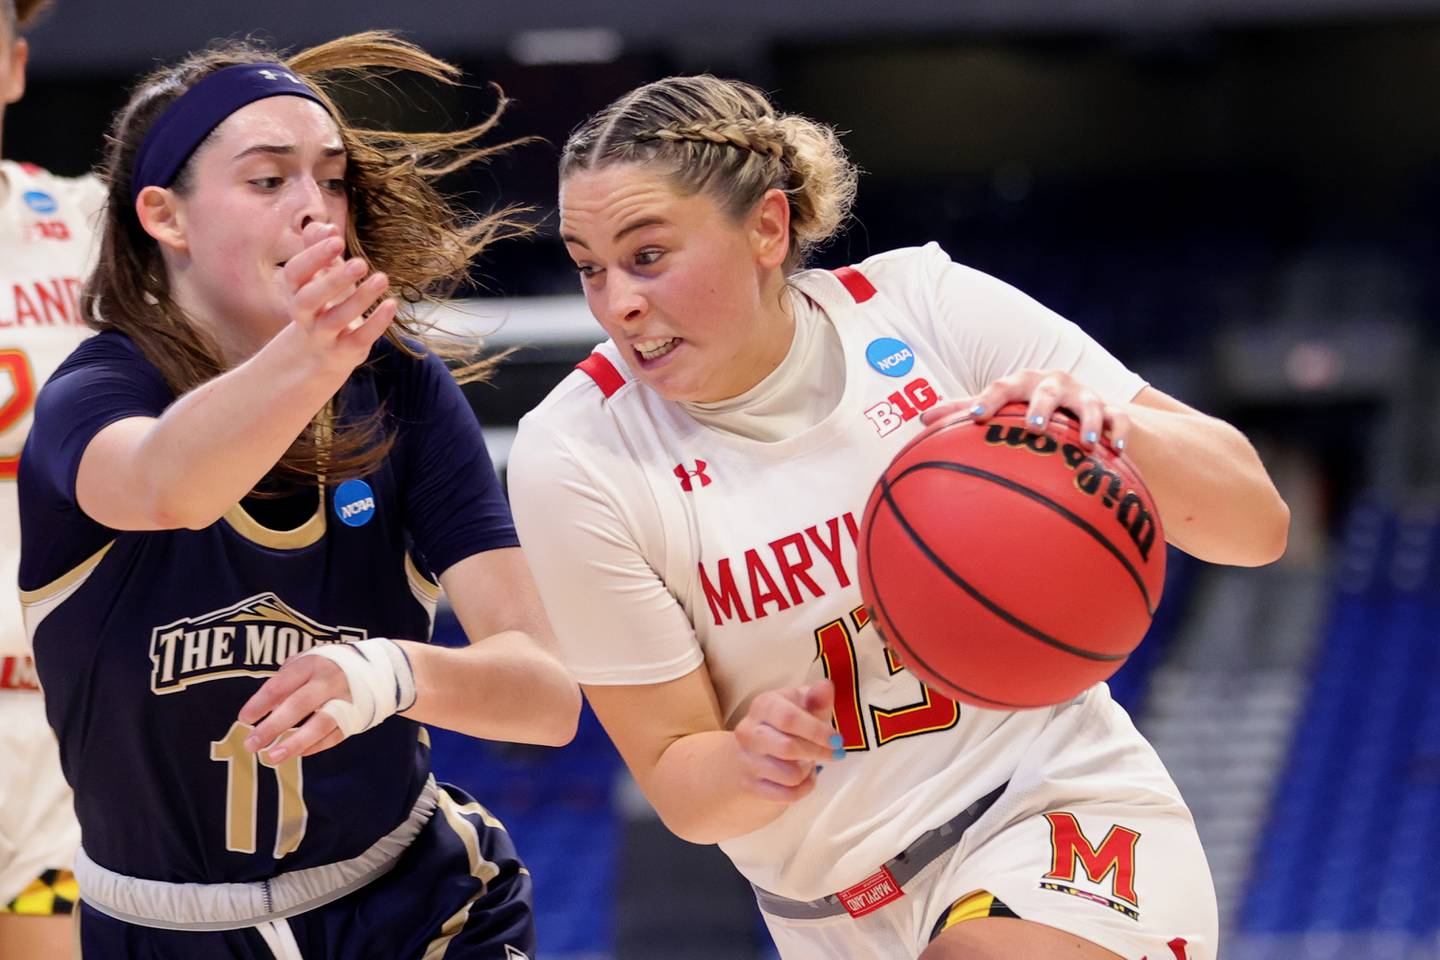 SAN ANTONIO, TEXAS - MARCH 22: Faith Masonius #13 of the Maryland Terrapins drives passed Bridget Birkhead #11 of the Mt. St. Mary's Mountaineers during the first half in the first round game of the 2021 NCAA Women's Basketball Tournament at the Alamodome on March 22, 2021 in San Antonio, Texas.